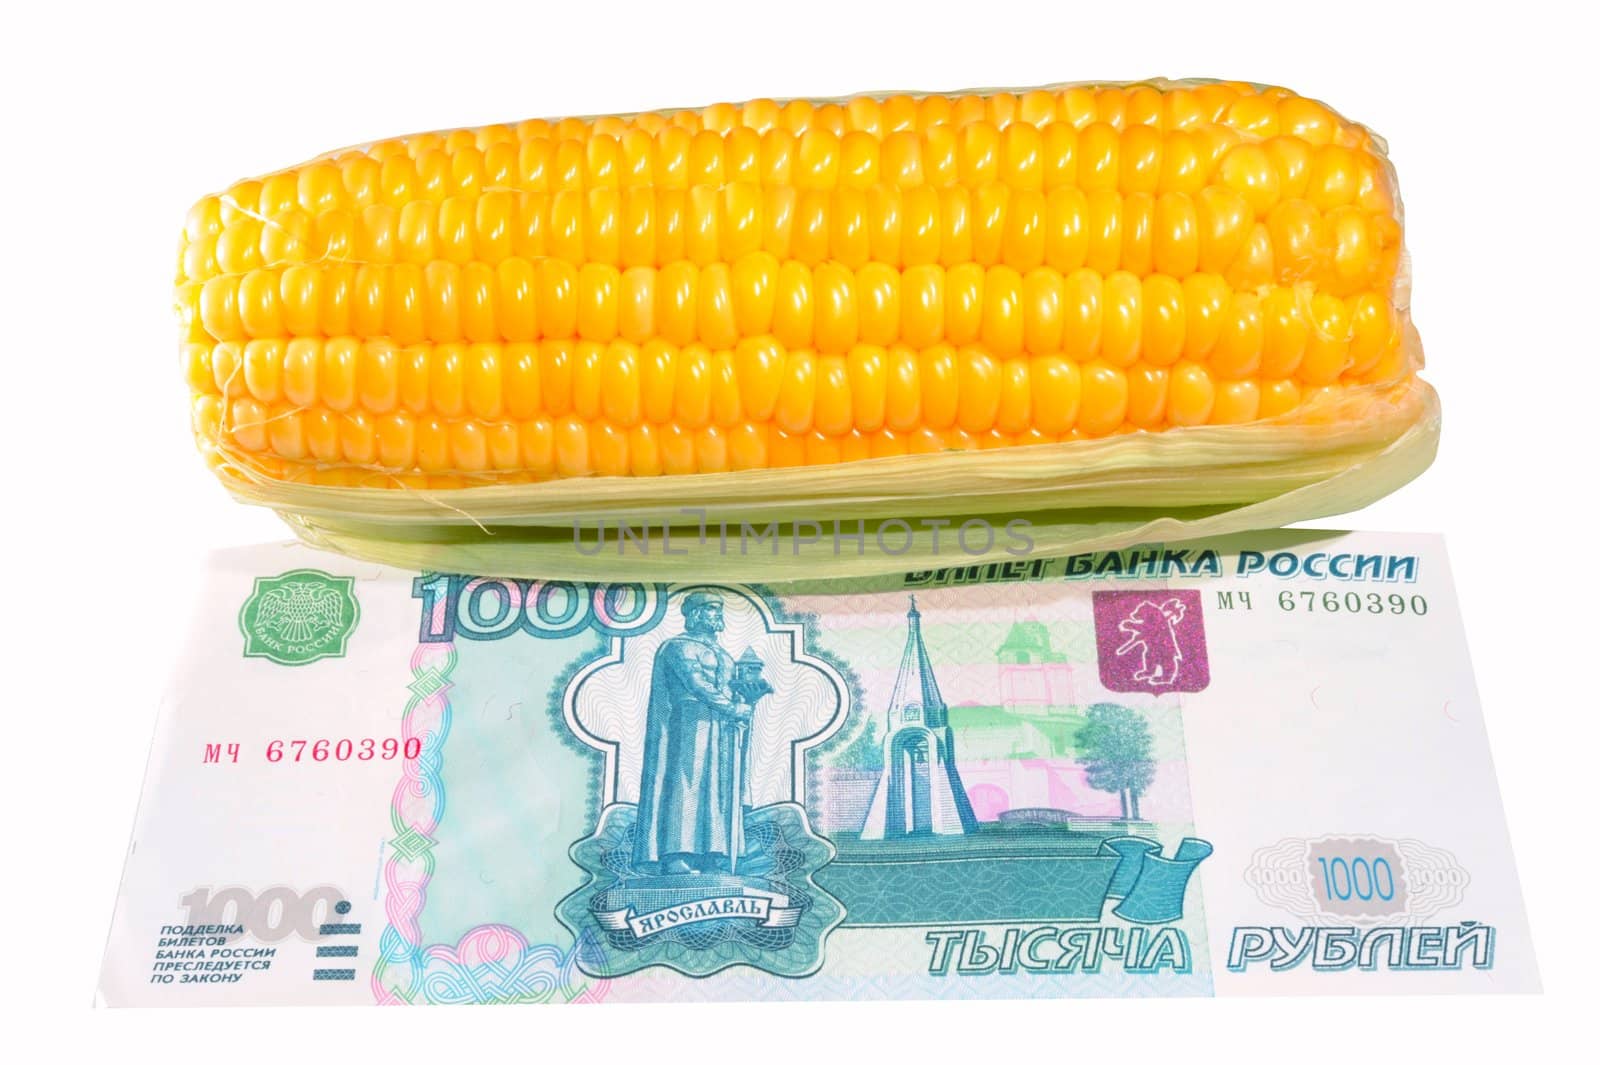 Corn On The Cob And Thousand Russian Rouble Bill.